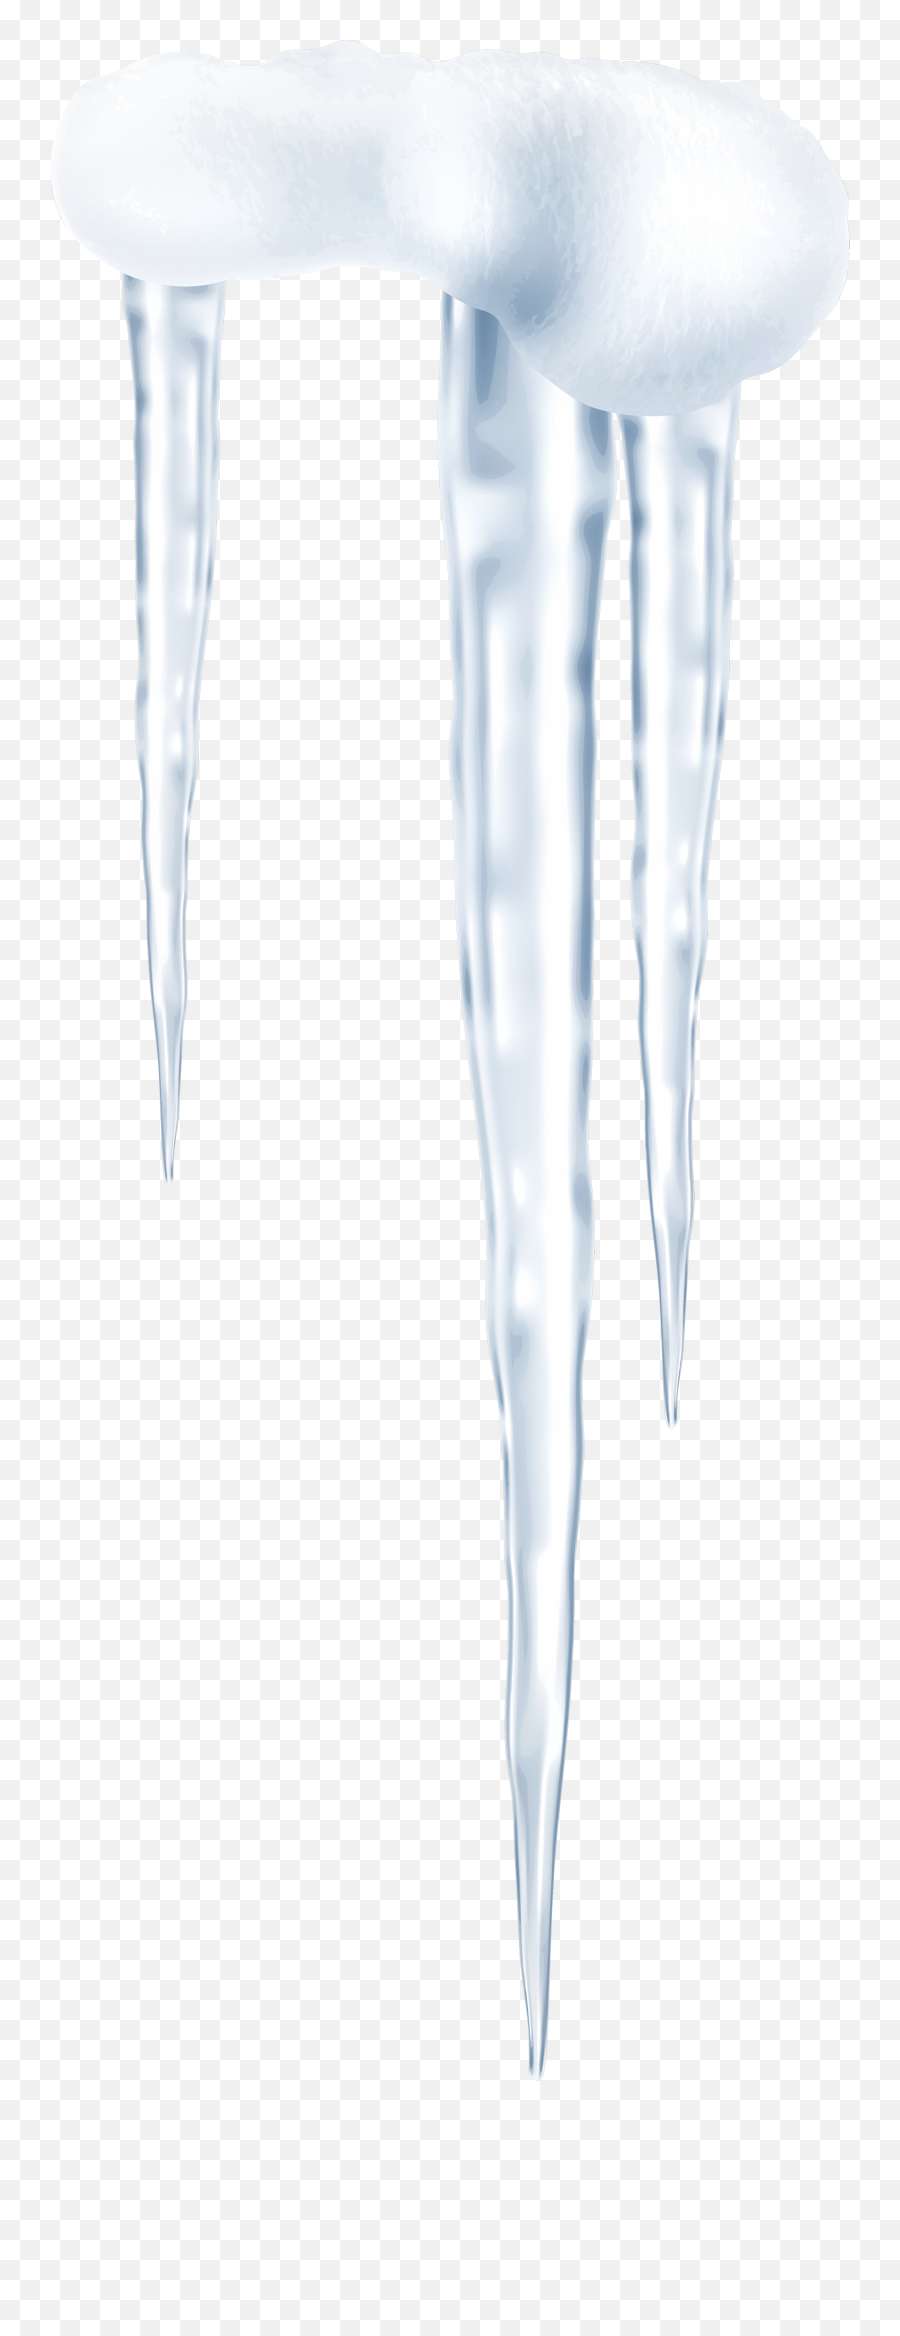 Icicles Download Transparent Png Image - Portable Network Graphics,Icicles Transparent